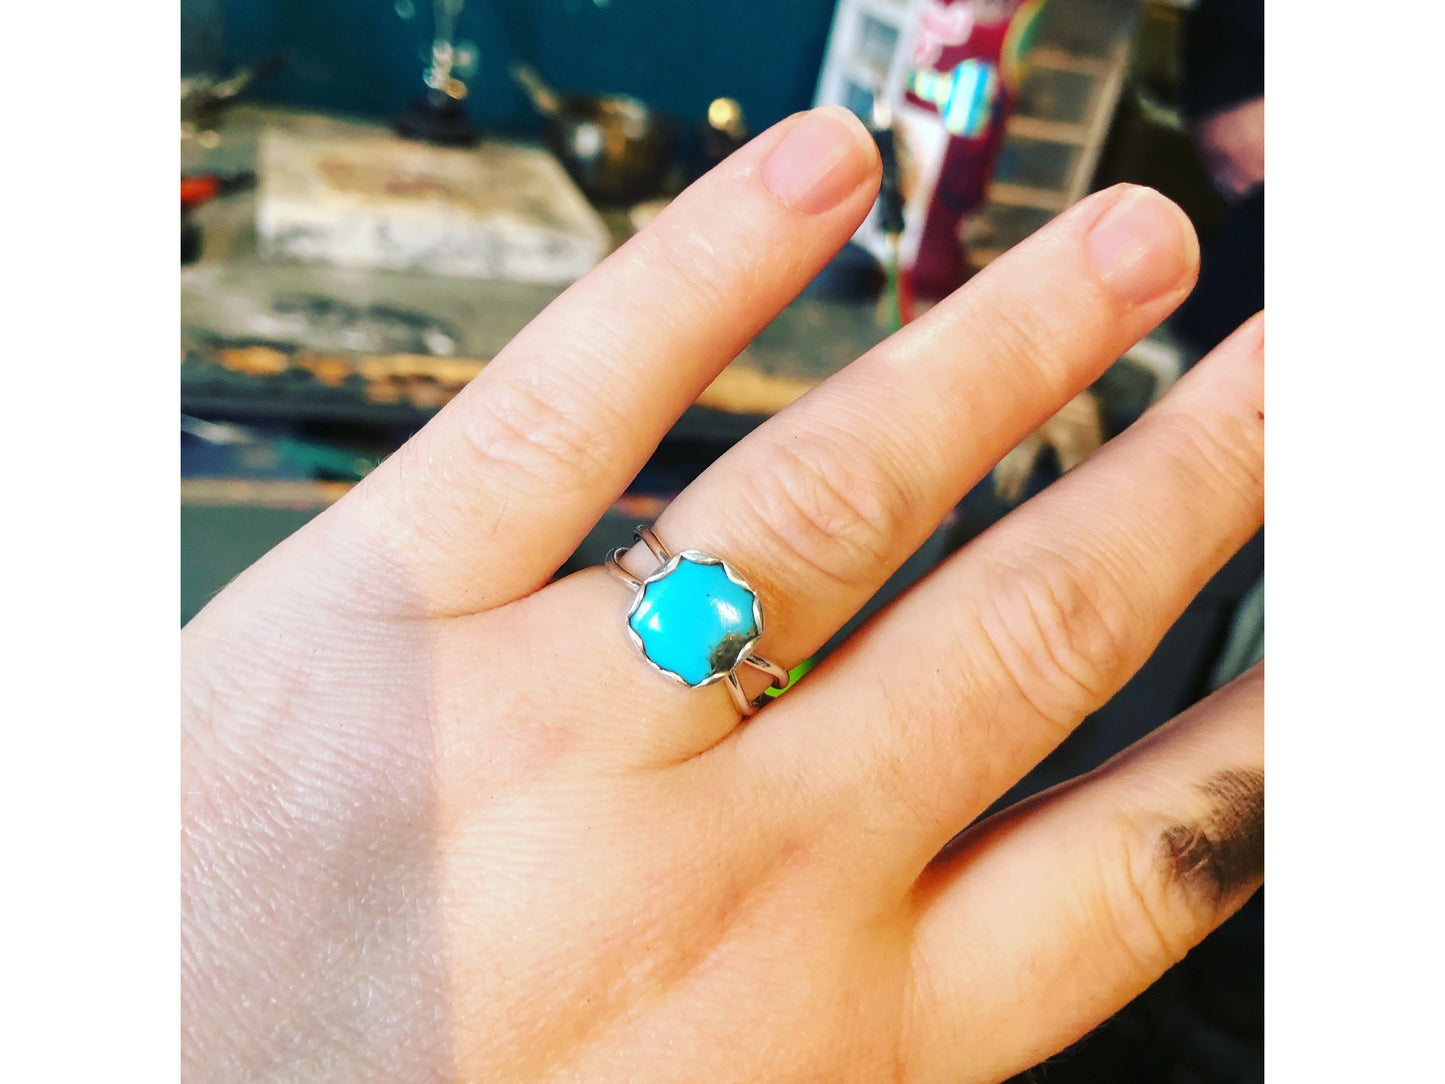 Small turquoise ring with square shaped stone.